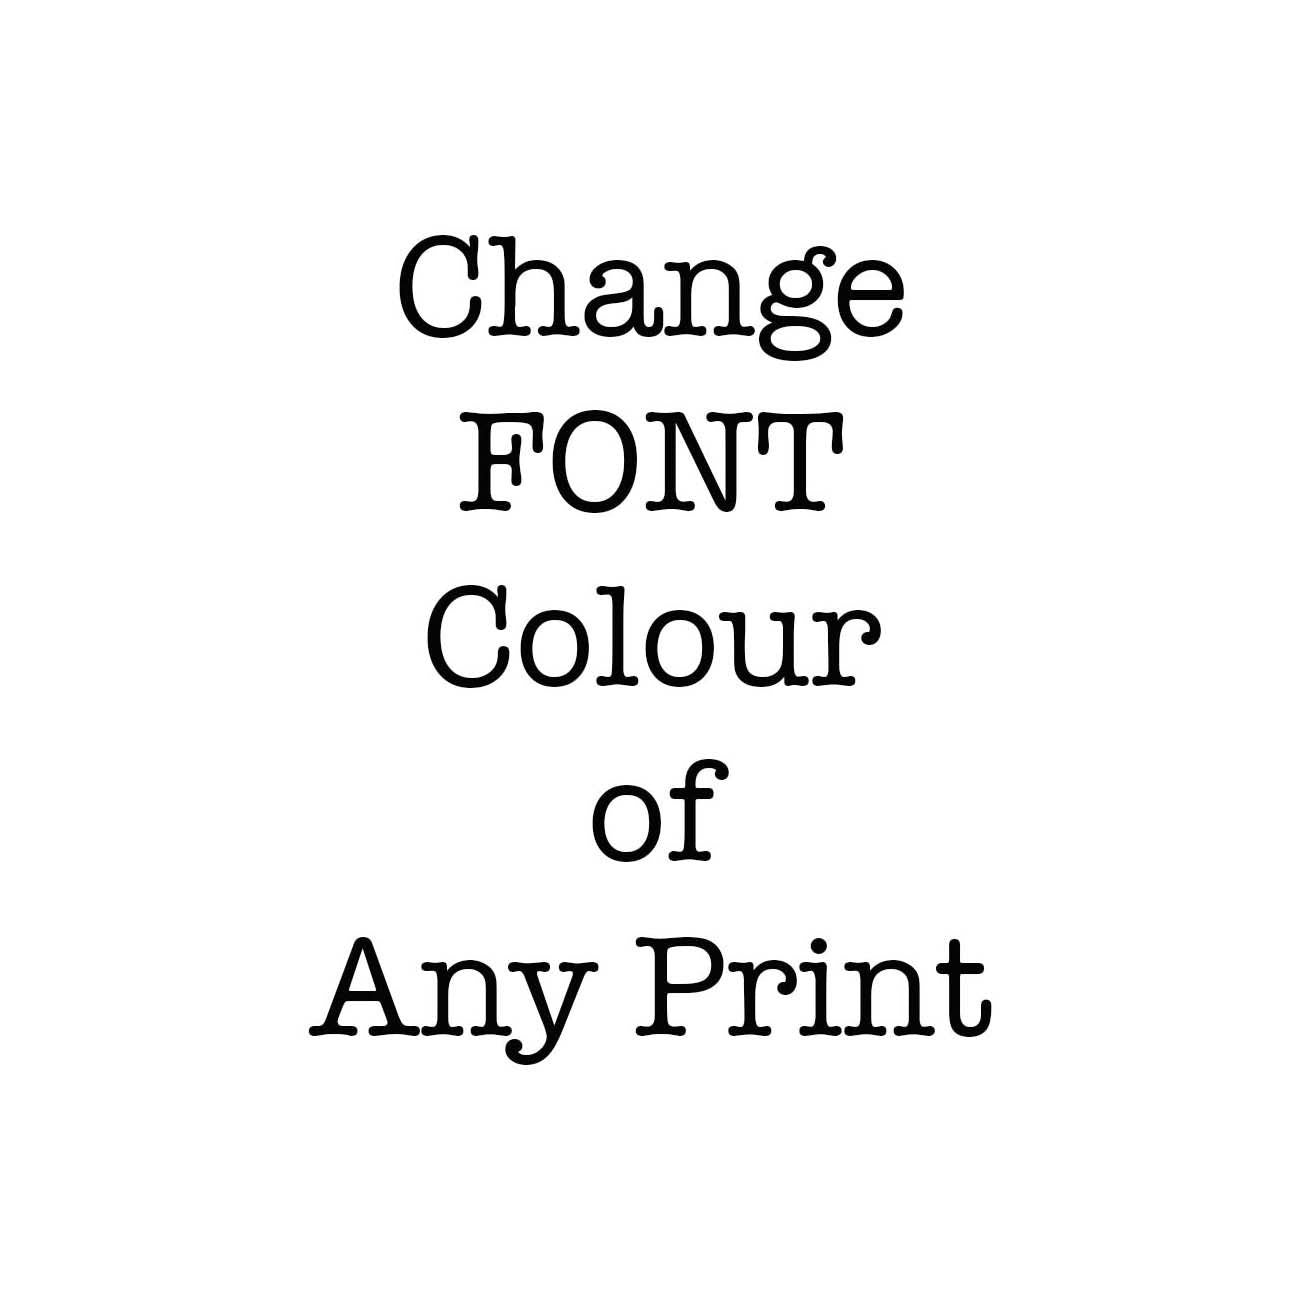 Change FONT Colour for any Unframed Print